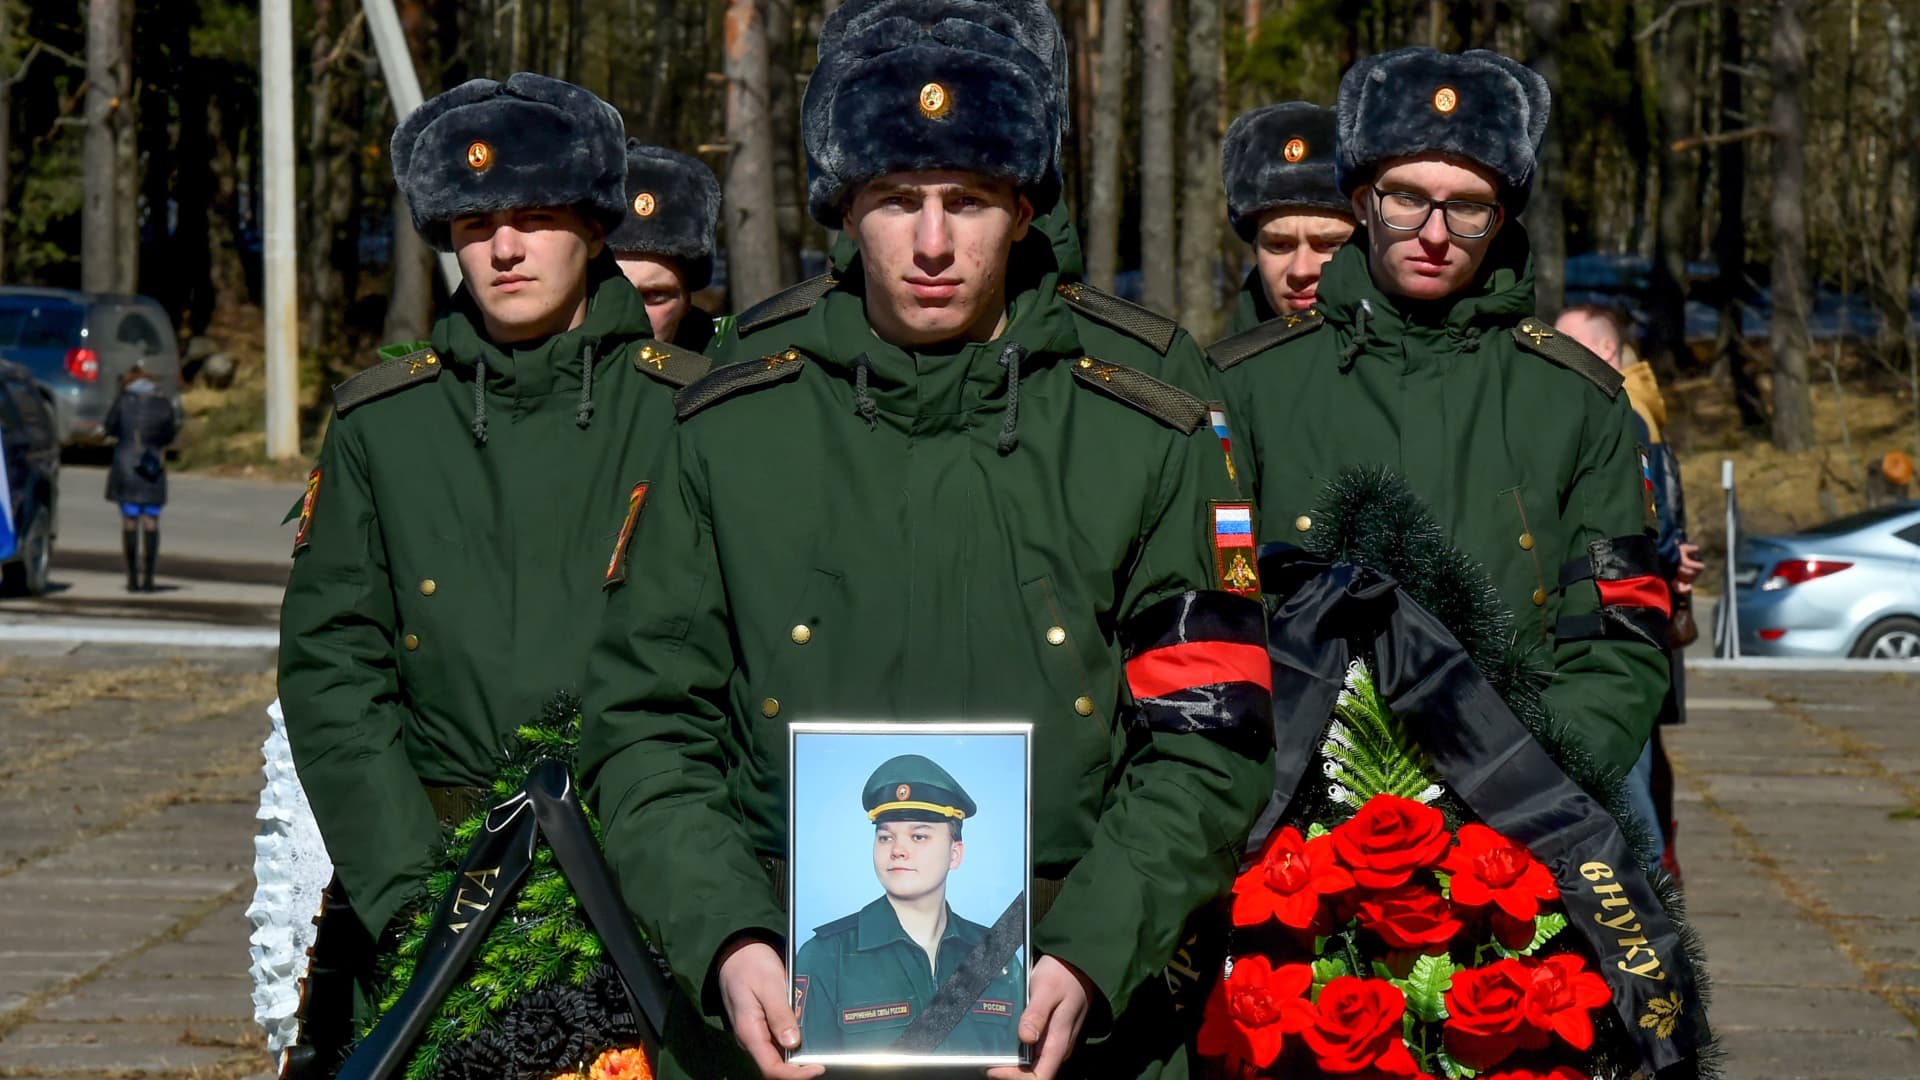 Russian soldiers carry wreathes and a picture of 20-year-old Russian serviceman Nikita Avrov, during his funeral in Luga, some 150kms south of Saint Petersburg on April 11, 2022, after his death on March 27, during the ongoing Russian invasion of Ukraine.